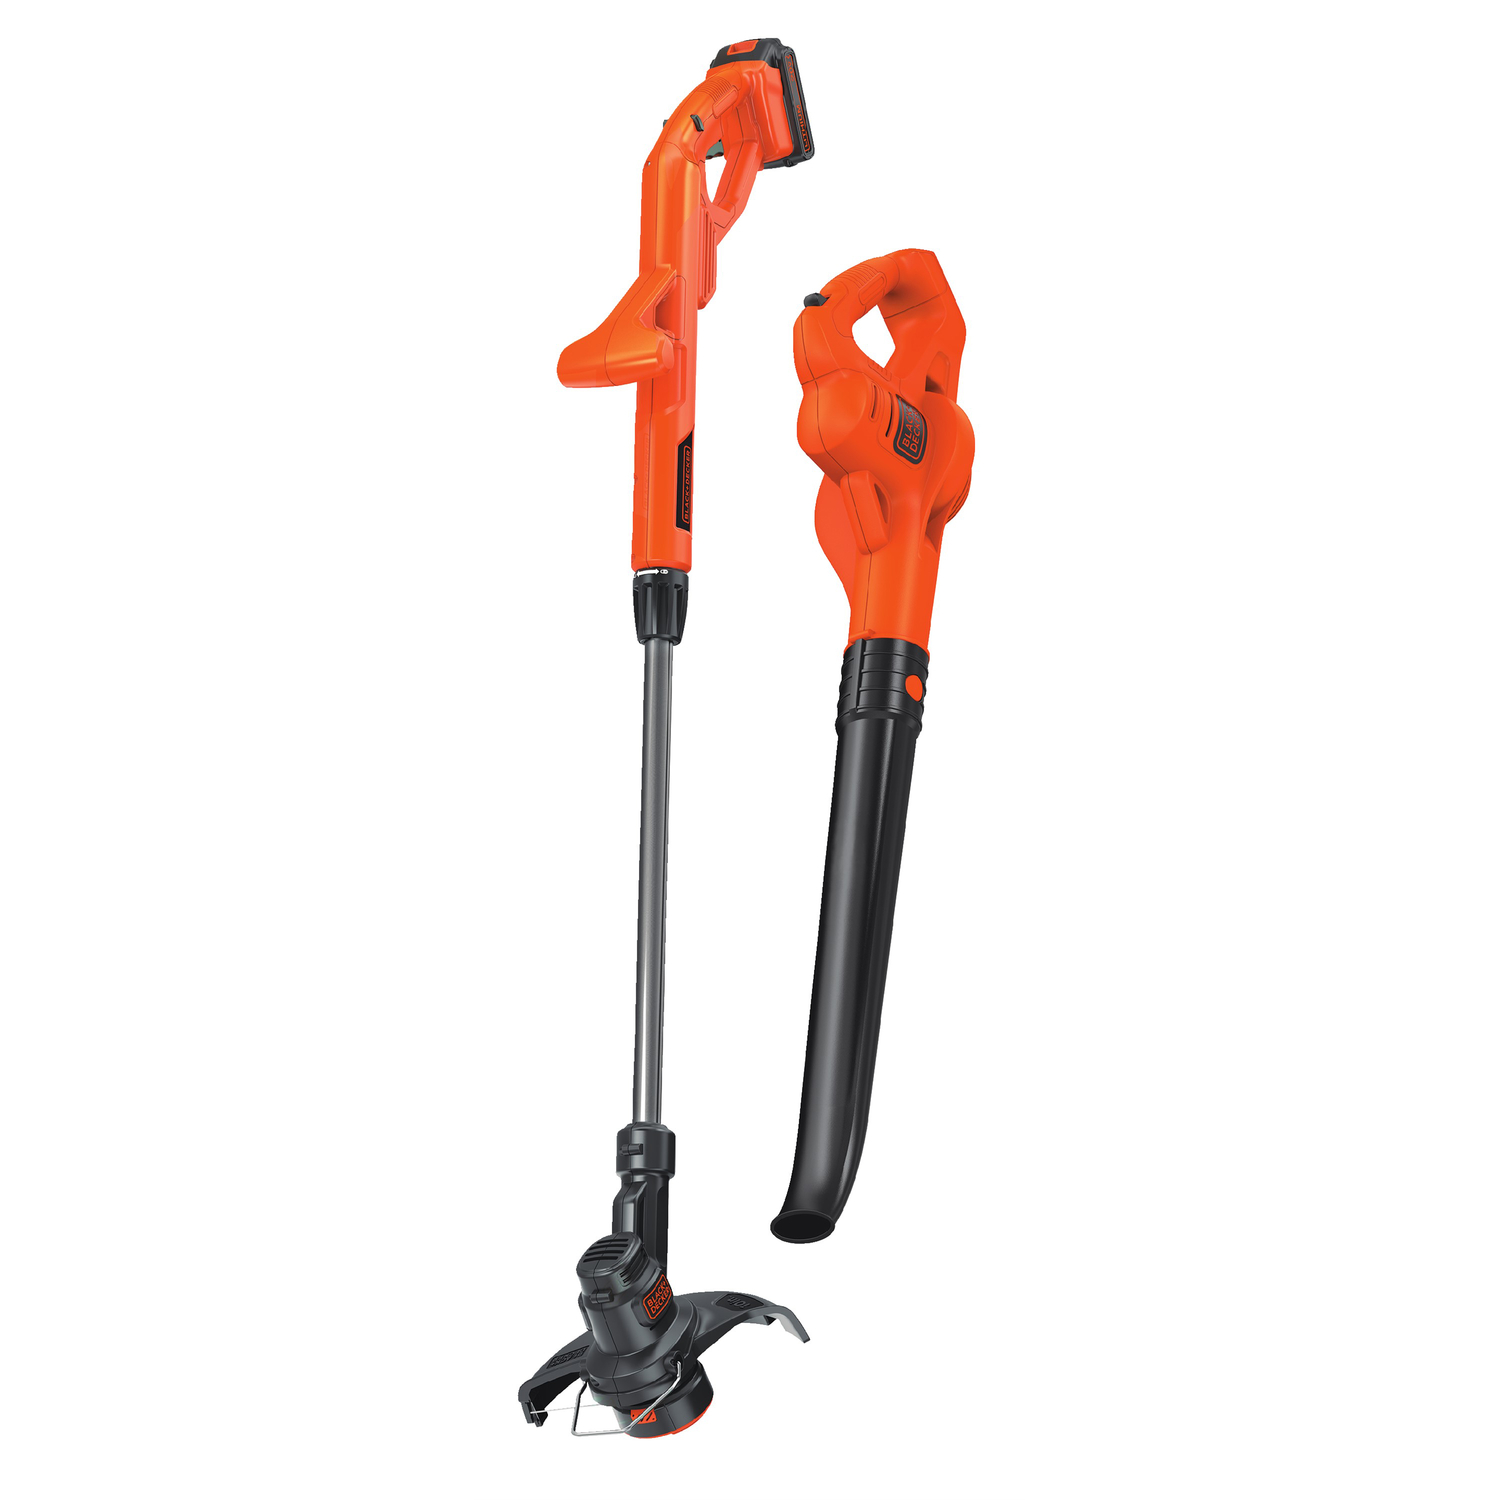 ace hardware weed trimmer